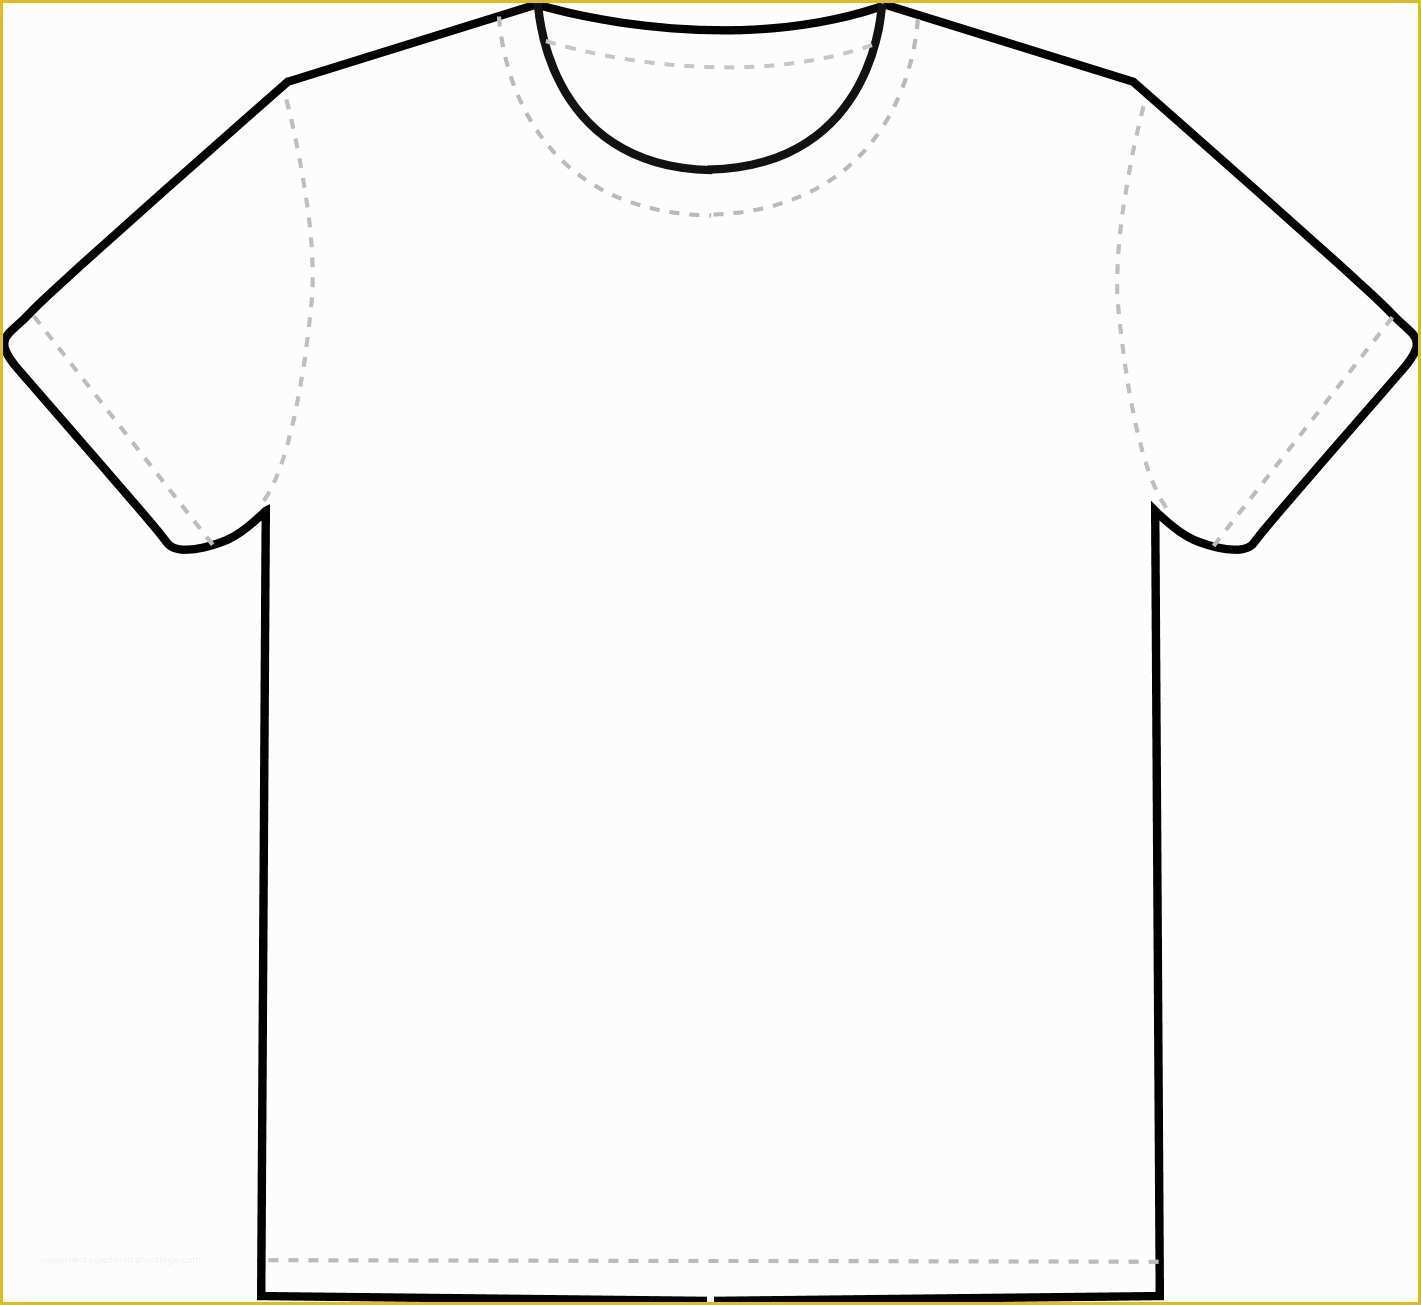 black-t-shirt-template-large-clip-art-library